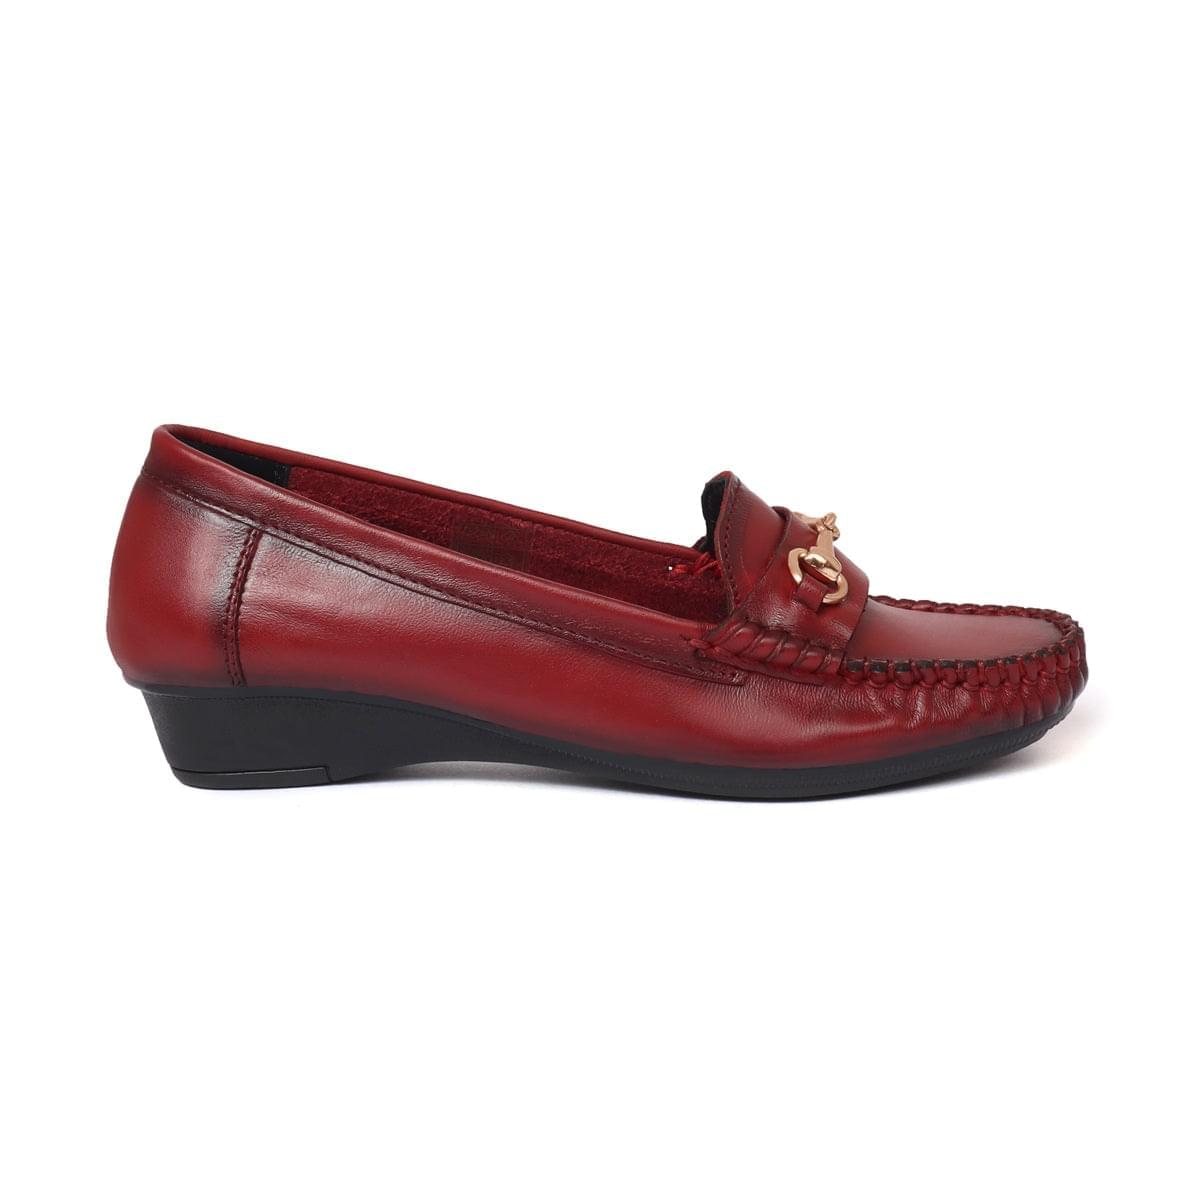 loafer formal shoes for women cherry